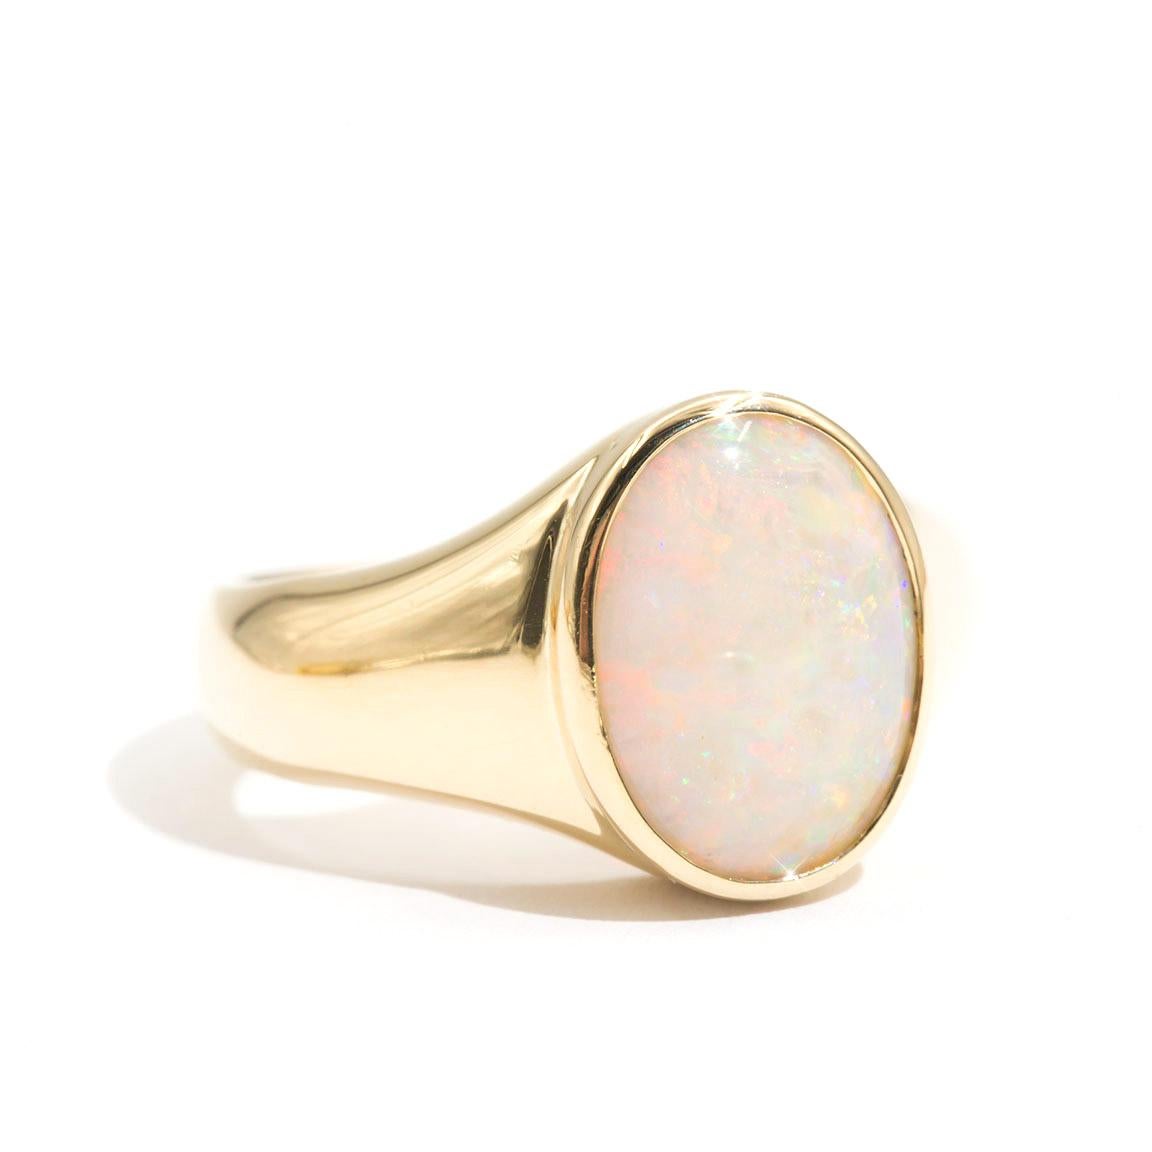 Forged in 18 carat yellow gold is this handsome mens solitaire signet ring that features an enchanting solid Australian opal.  We have named this dapper vintage ring The Mayfair Ring. The Mayfair Ring has smooth, curved lines and flows to a domed